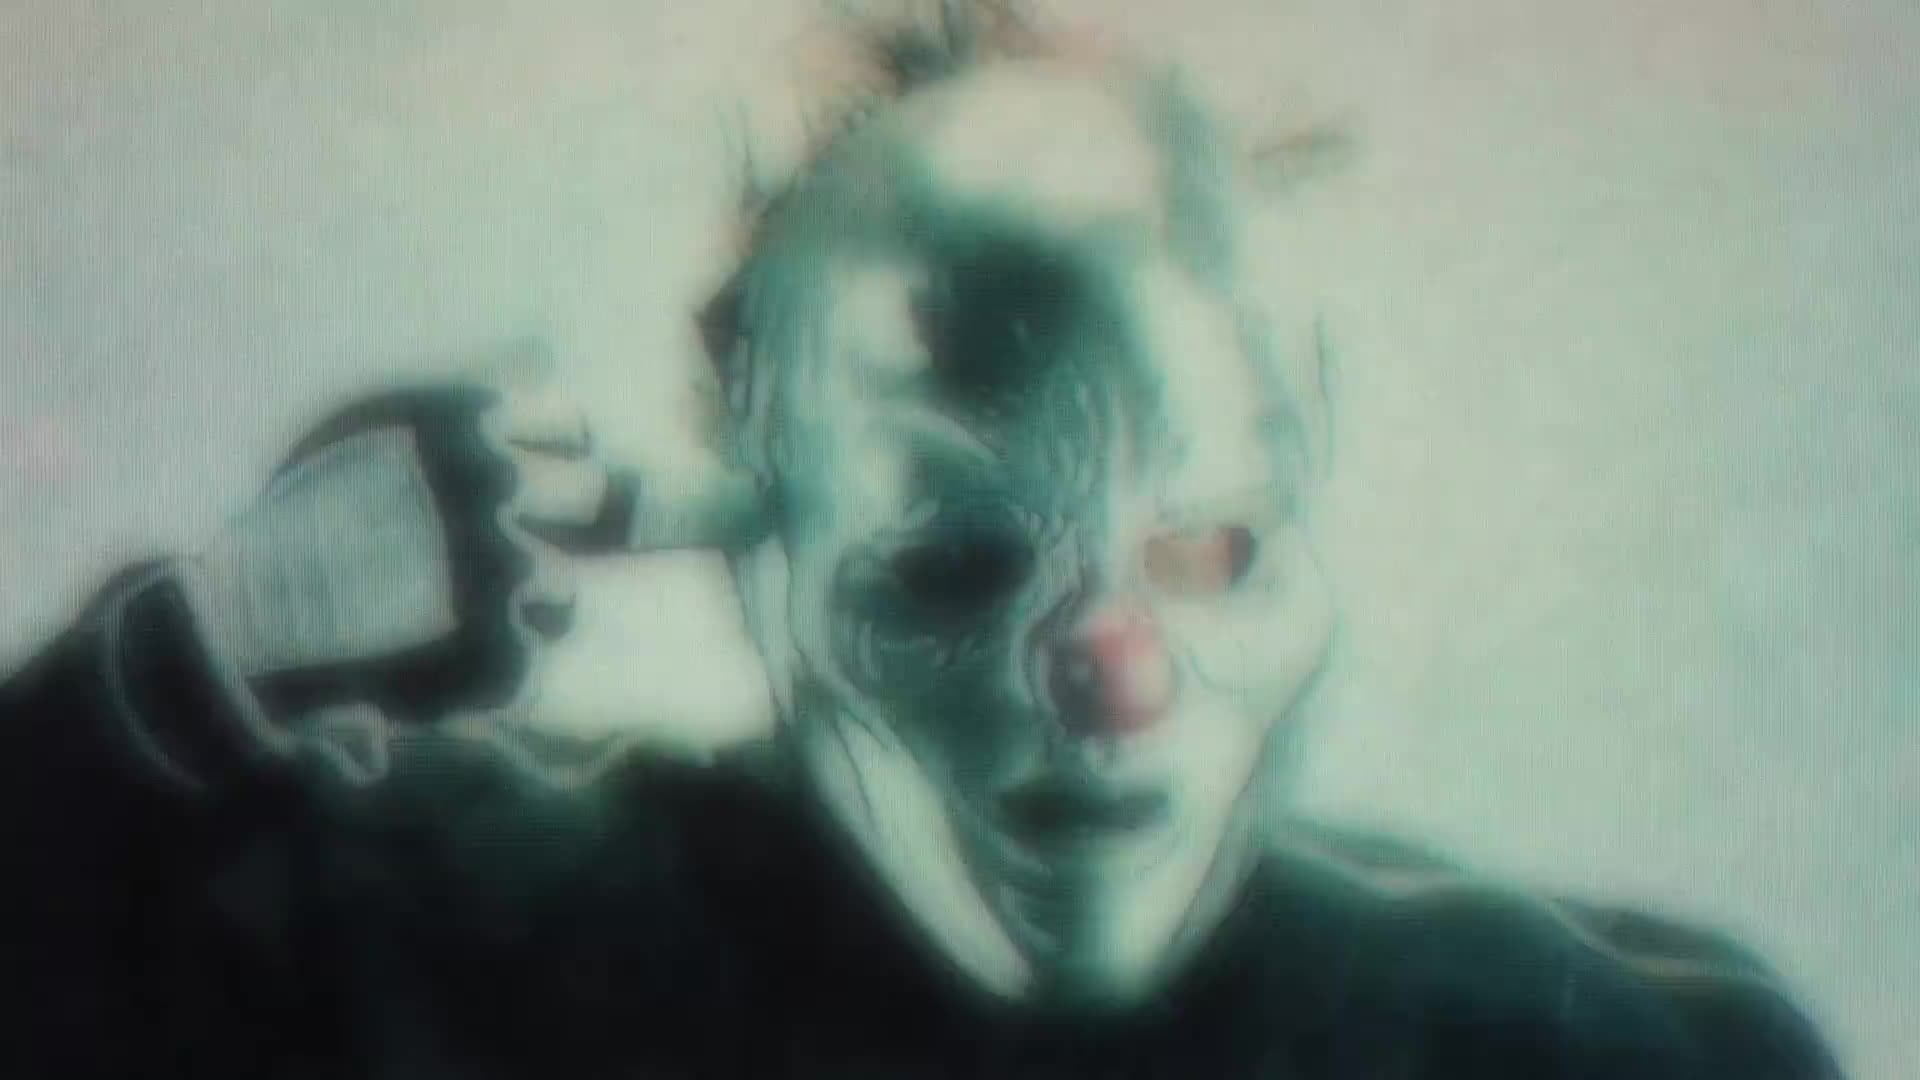 Slipknot Unsainted OFFICIAL VIDEO